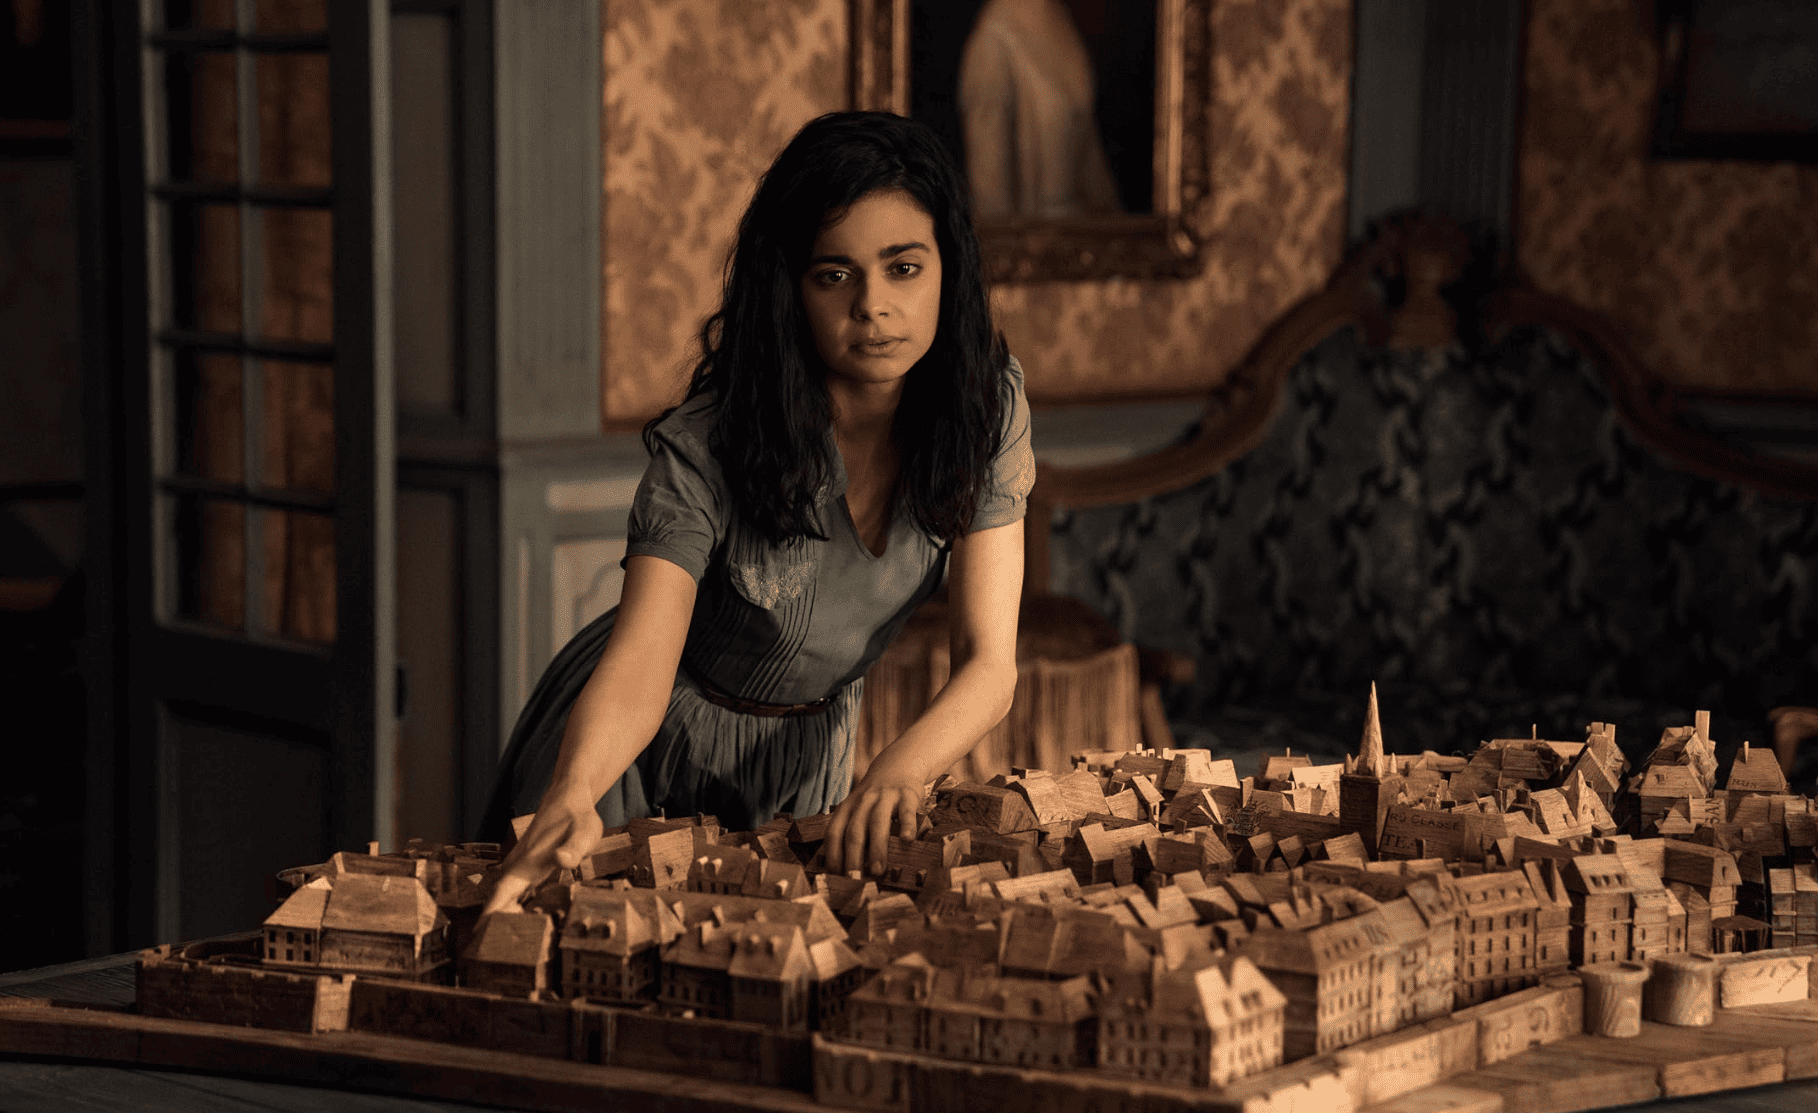 A girl studies a wooden diorama of a city in this image from 21 Laps Entertainment. 